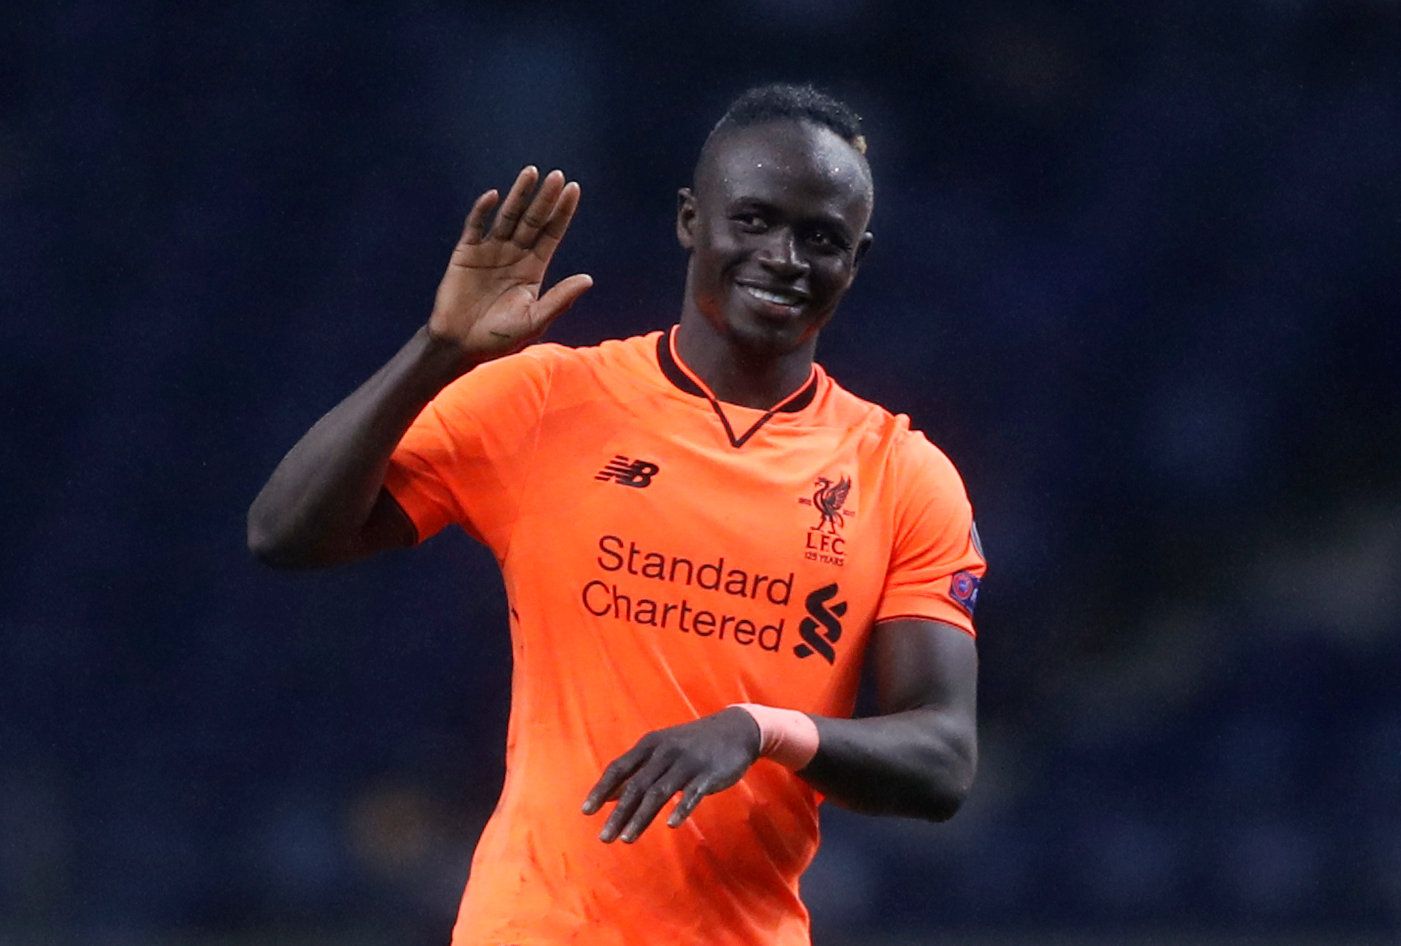 Soccer Football - Champions League Round of 16 First Leg - FC Porto vs Liverpool - Estadio do Dragao, Porto, Portugal - February 14, 2018   Liverpool's Sadio Mane celebrates at the end of the match    Action Images via Reuters/Matthew Childs